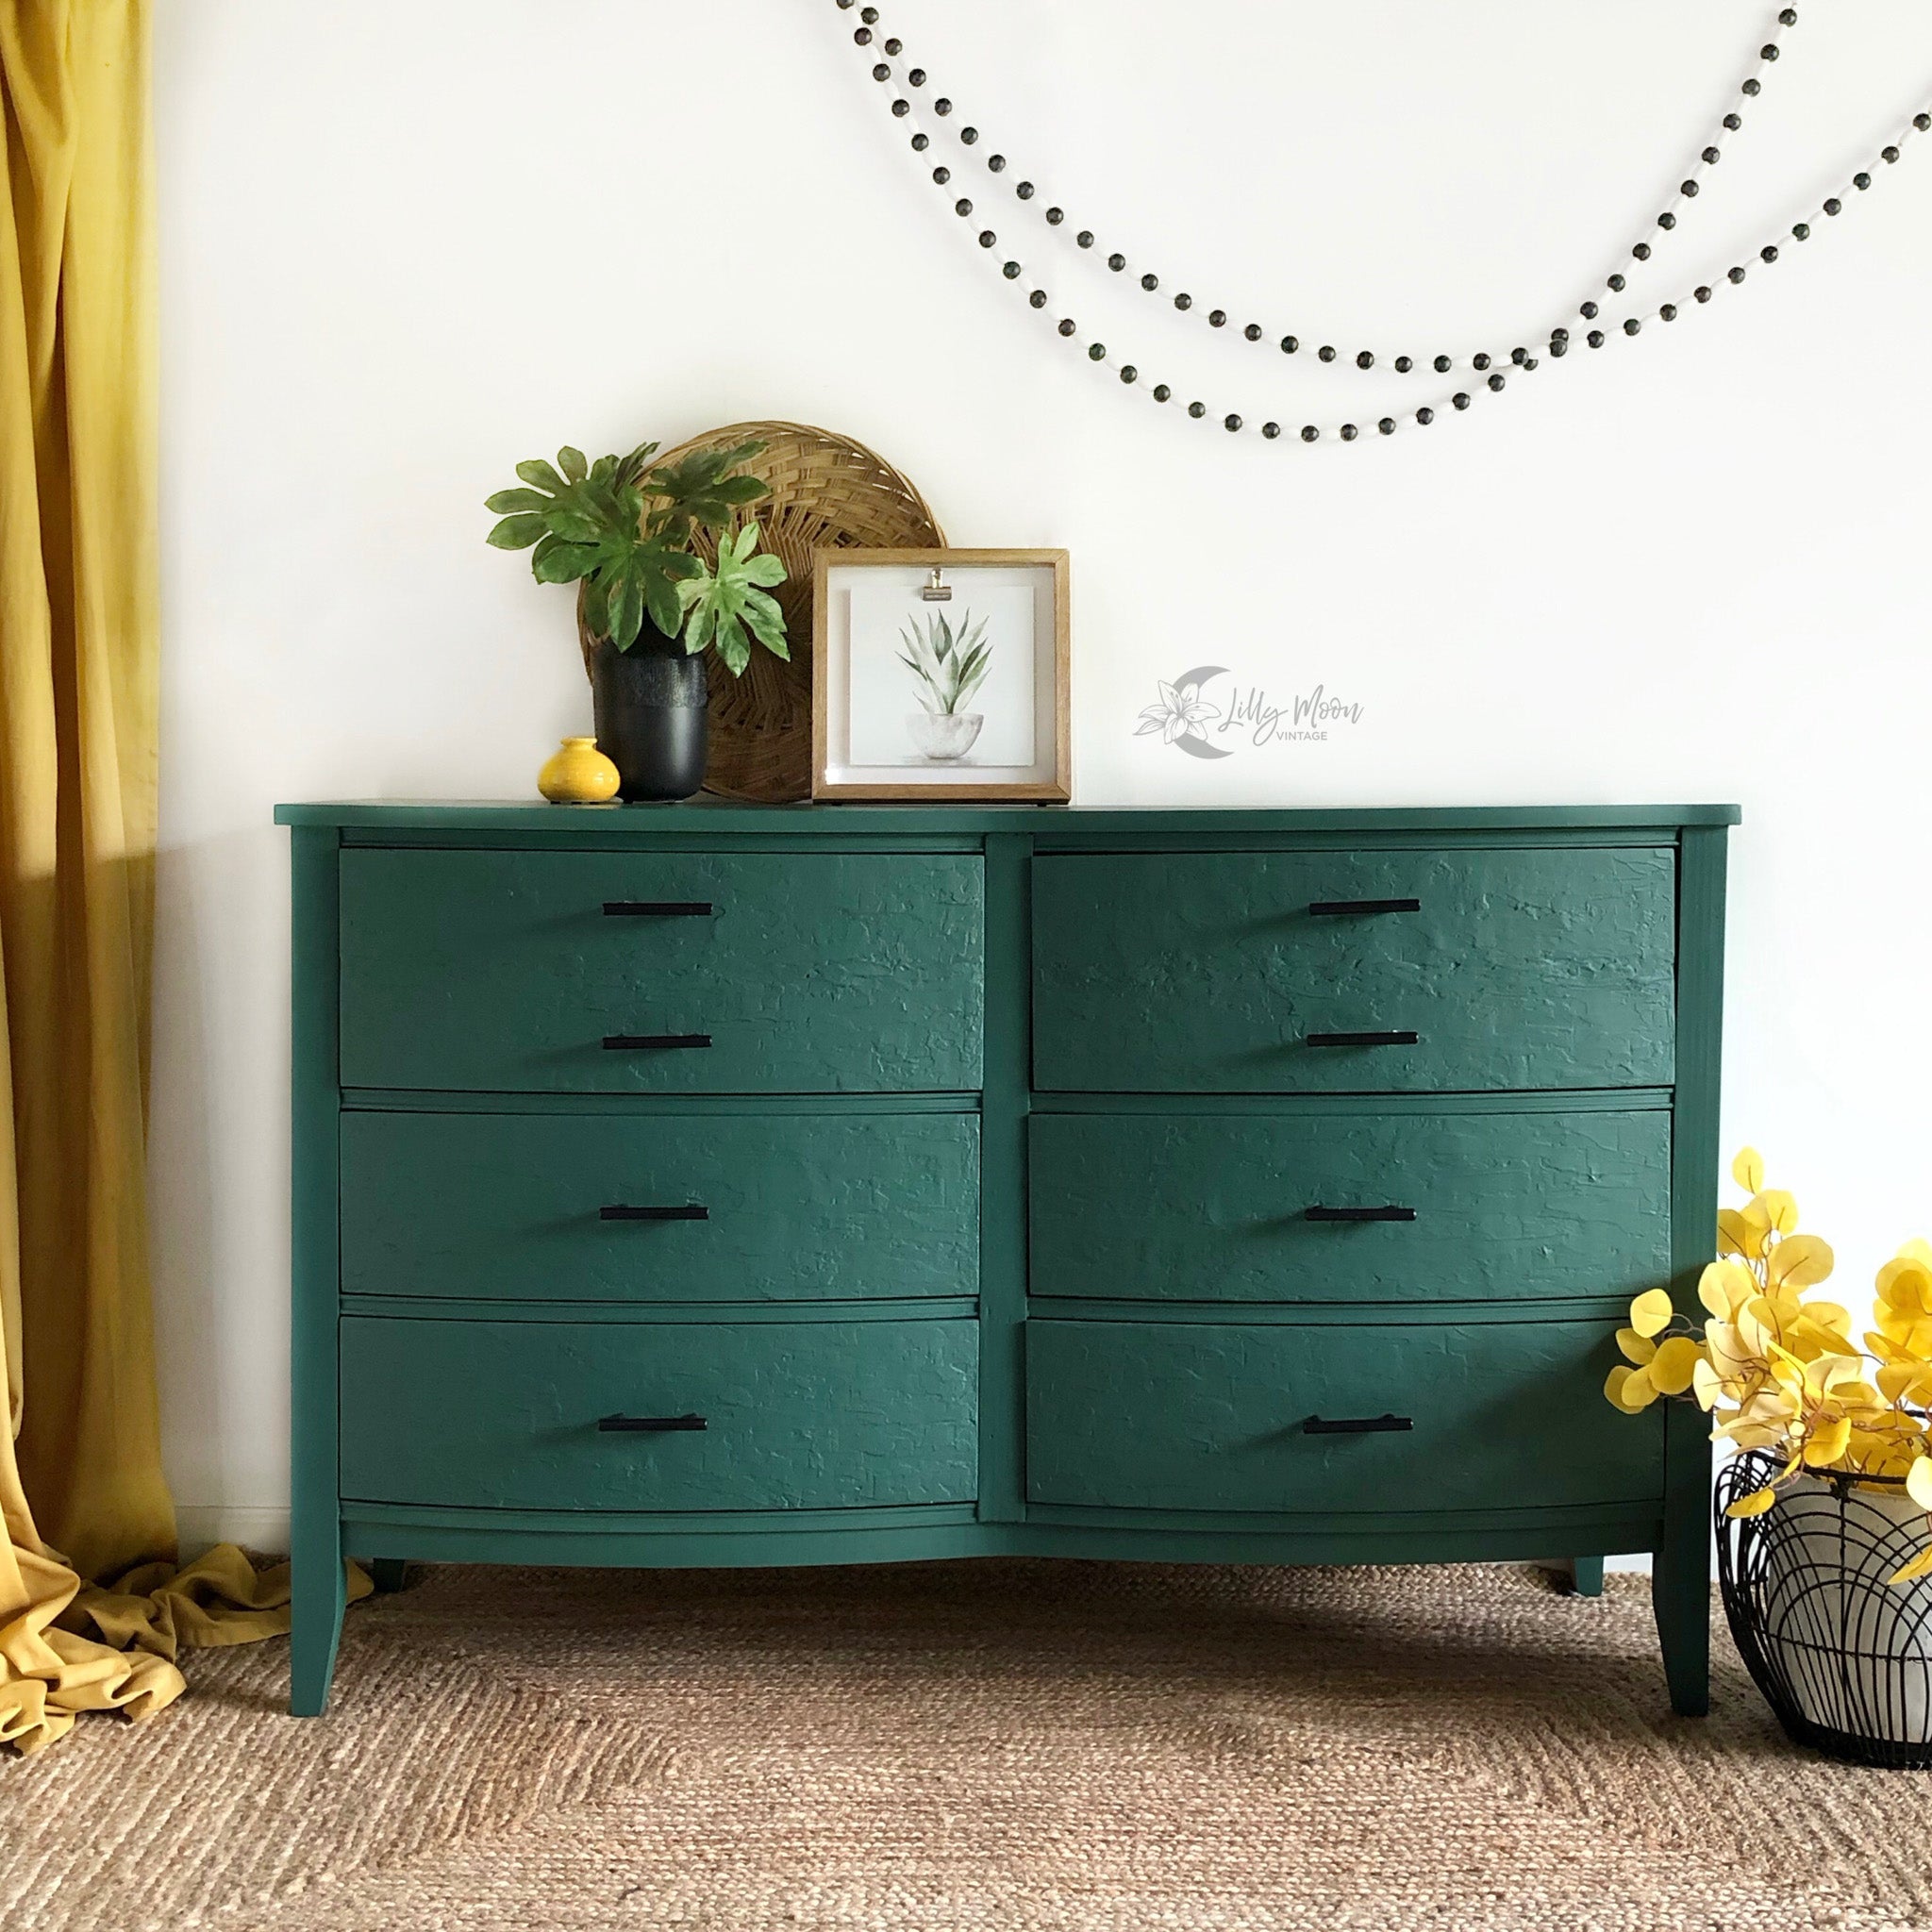 A vintage 6-drawer dresser refurbished by Lilly Moon Vintage is painted in Dixie Belle's Palmetto chalk mineral paint.